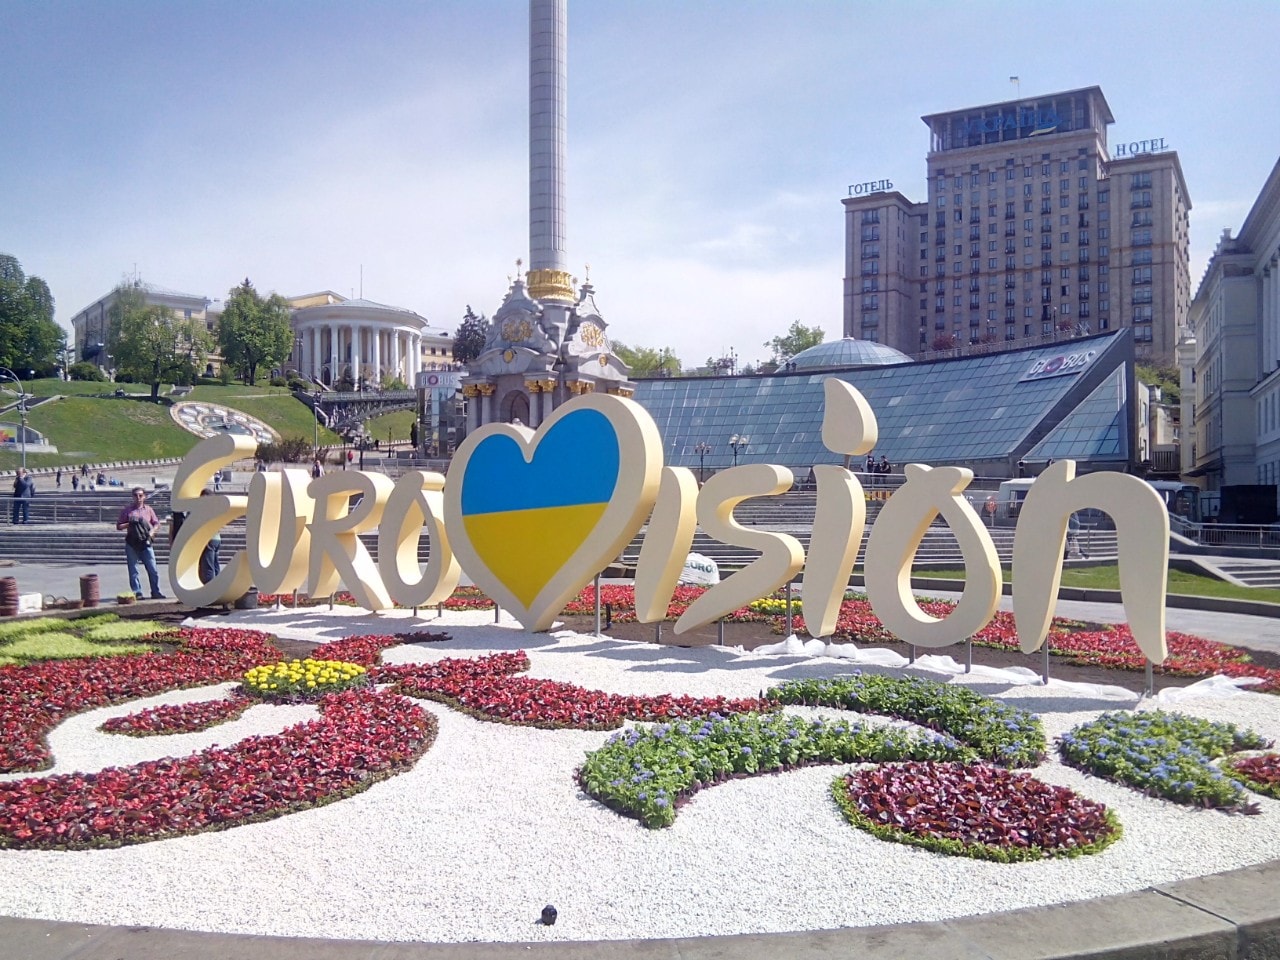 The 2017 Eurovision Song Contest will be held in Kiev, Ukraine. Image: Tohaomg/Wikimedia Commons.